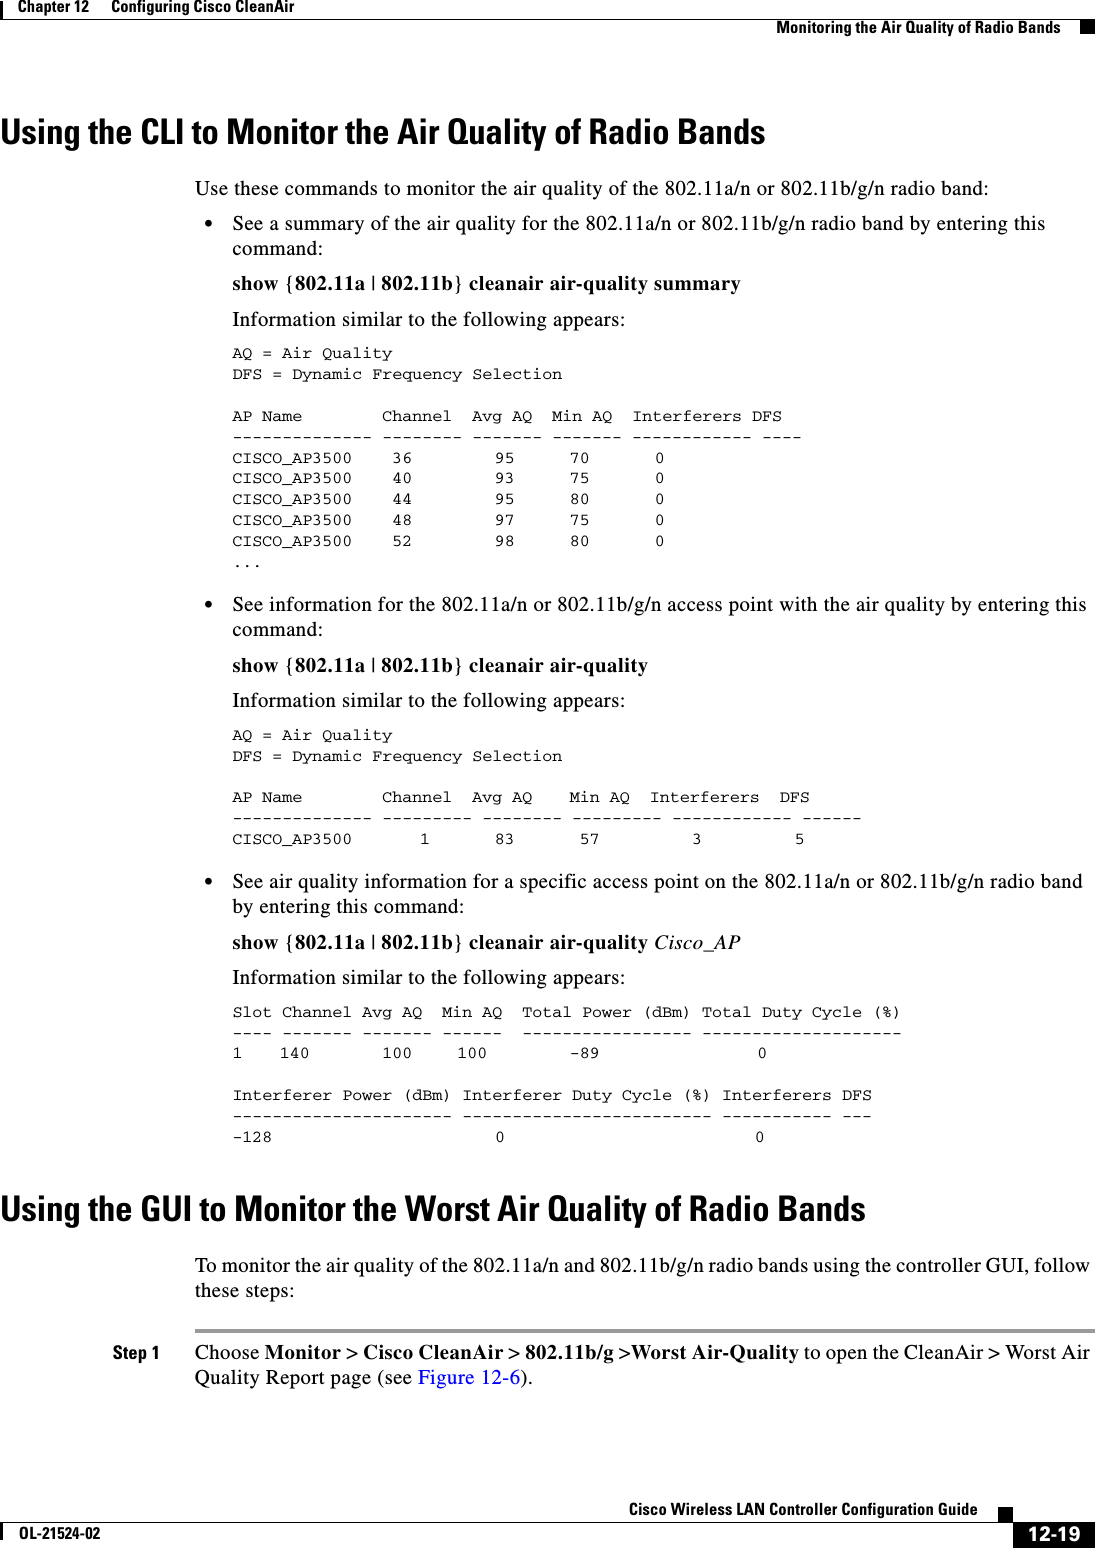  12-19Cisco Wireless LAN Controller Configuration GuideOL-21524-02Chapter 12      Configuring Cisco CleanAirMonitoring the Air Quality of Radio BandsUsing the CLI to Monitor the Air Quality of Radio BandsUse these commands to monitor the air quality of the 802.11a/n or 802.11b/g/n radio band:  • See a summary of the air quality for the 802.11a/n or 802.11b/g/n radio band by entering this command:show {802.11a | 802.11b} cleanair air-quality summaryInformation similar to the following appears:AQ = Air QualityDFS = Dynamic Frequency Selection AP Name      Channel  Avg AQ  Min AQ  Interferers DFS-------------- -------- ------- ------- ------------ ----CISCO_AP3500  36     95    70   0CISCO_AP3500  40         93 75     0CISCO_AP3500  44         95  80     0CISCO_AP3500  48         97  75     0CISCO_AP3500  52         98  80     0...   • See information for the 802.11a/n or 802.11b/g/n access point with the air quality by entering this command:show {802.11a | 802.11b} cleanair air-qualityInformation similar to the following appears:AQ = Air QualityDFS = Dynamic Frequency Selection AP Name      Channel  Avg AQ  Min AQ  Interferers  DFS-------------- --------- -------- --------- ------------ ------CISCO_AP3500 1  83   57    3   5   • See air quality information for a specific access point on the 802.11a/n or 802.11b/g/n radio band by entering this command:show {802.11a | 802.11b} cleanair air-quality Cisco_APInformation similar to the following appears:Slot Channel Avg AQ  Min AQ  Total Power (dBm) Total Duty Cycle (%)---- ------- ------- ------  ----------------- --------------------1  140  100 100 -89  0Interferer Power (dBm) Interferer Duty Cycle (%) Interferers DFS---------------------- ------------------------- ----------- ----128 0                         0Using the GUI to Monitor the Worst Air Quality of Radio BandsTo monitor the air quality of the 802.11a/n and 802.11b/g/n radio bands using the controller GUI, follow these steps:Step 1 Choose Monitor &gt; Cisco CleanAir &gt; 802.11b/g &gt;Worst Air-Quality to open the CleanAir &gt; Worst Air Quality Report page (see Figure 12-6).